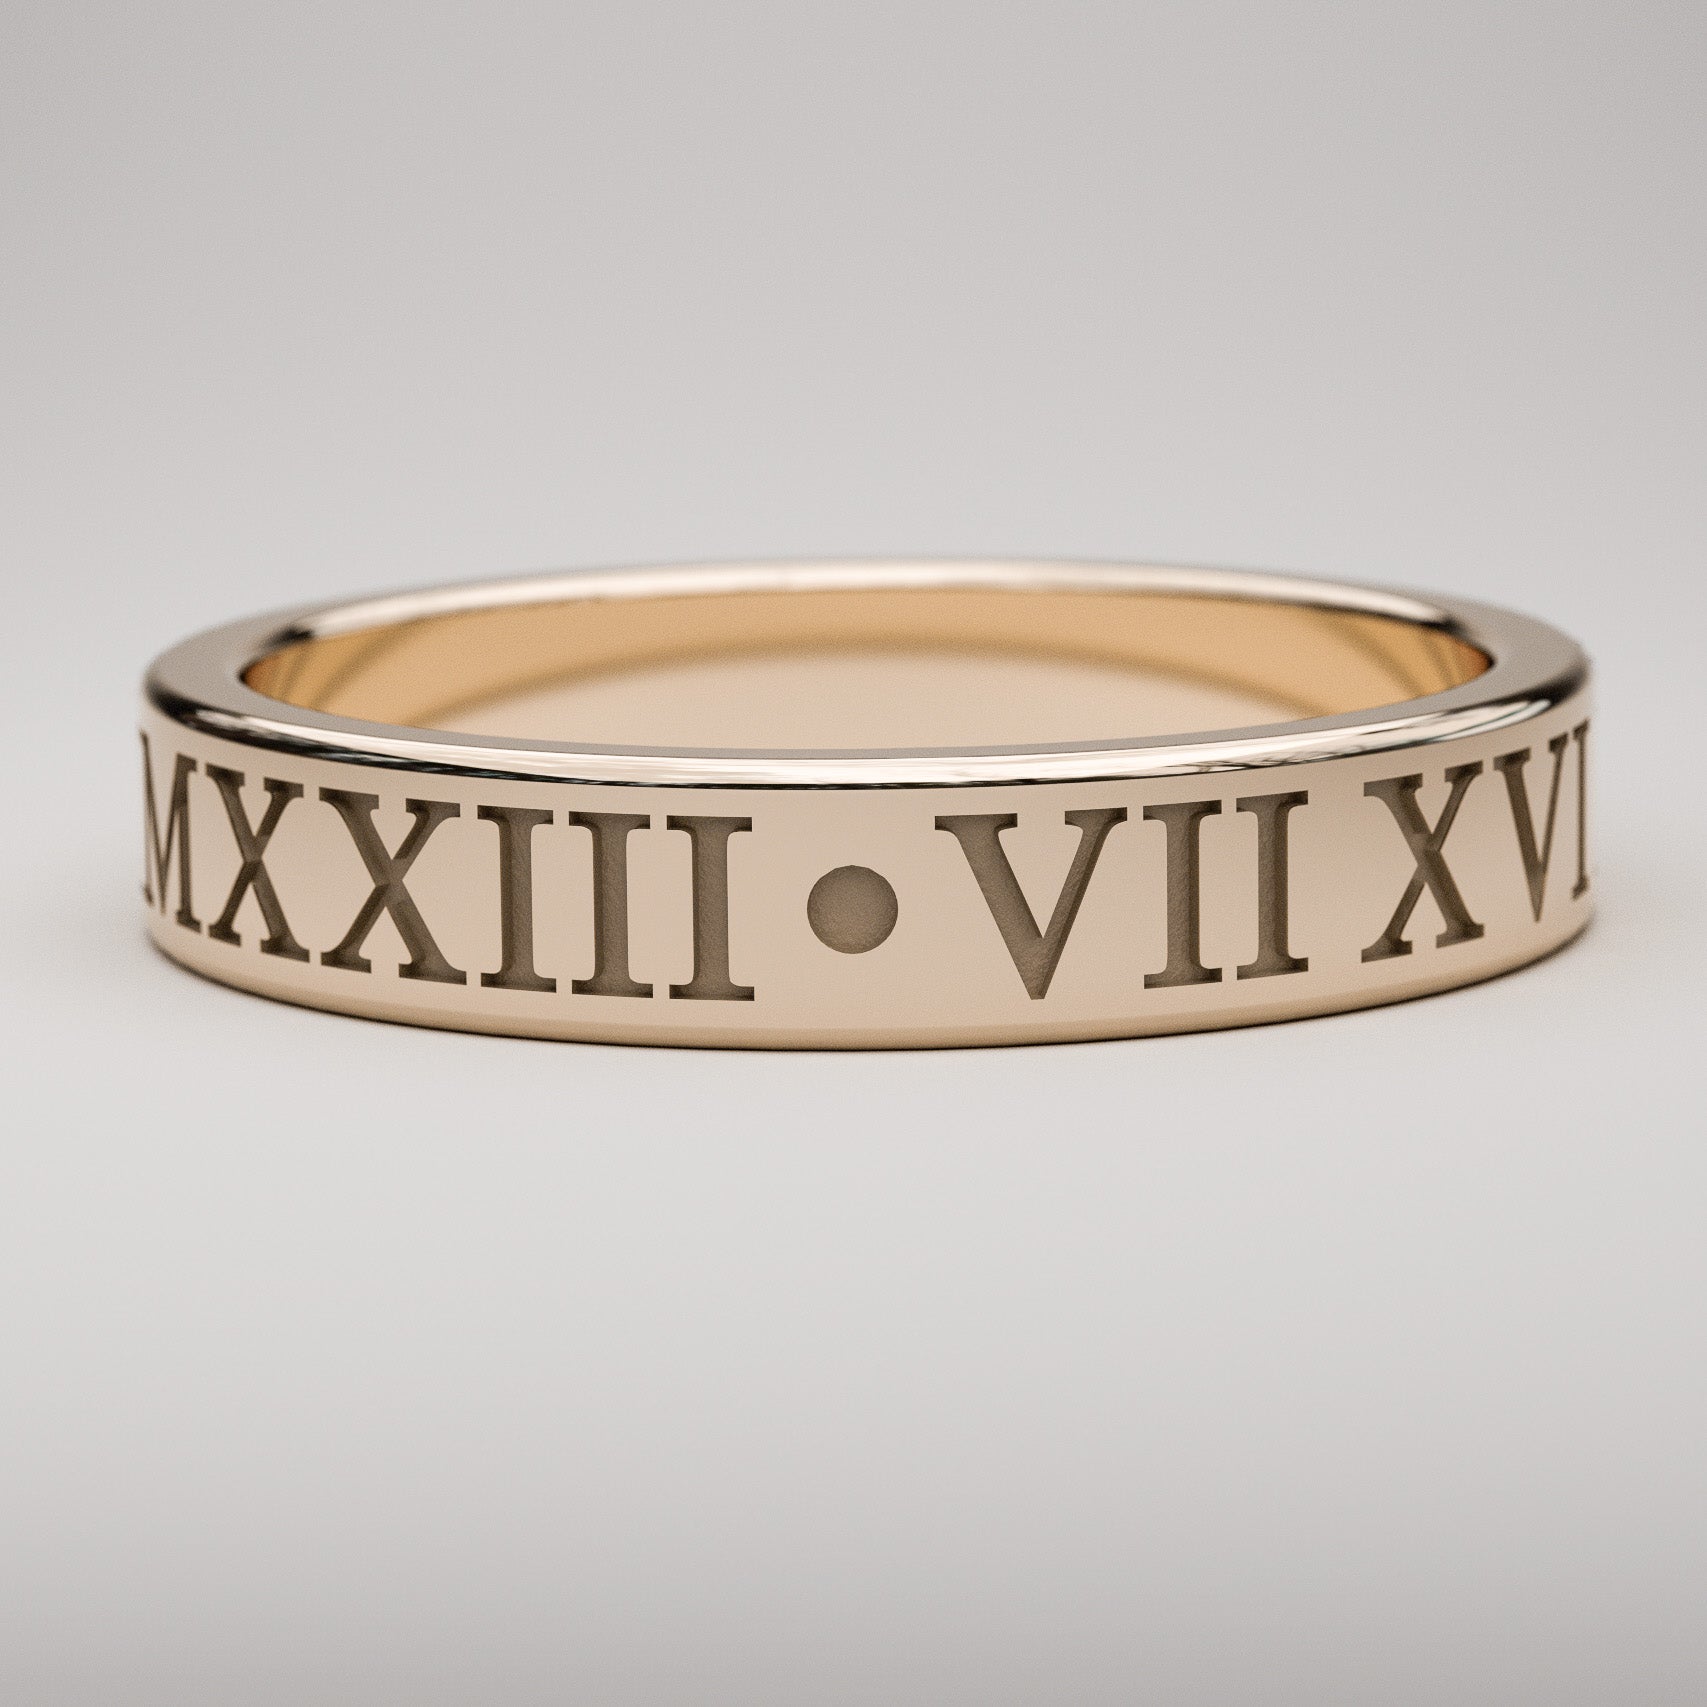 4mm engraved style custom Roman Numeral date ring in rose gold